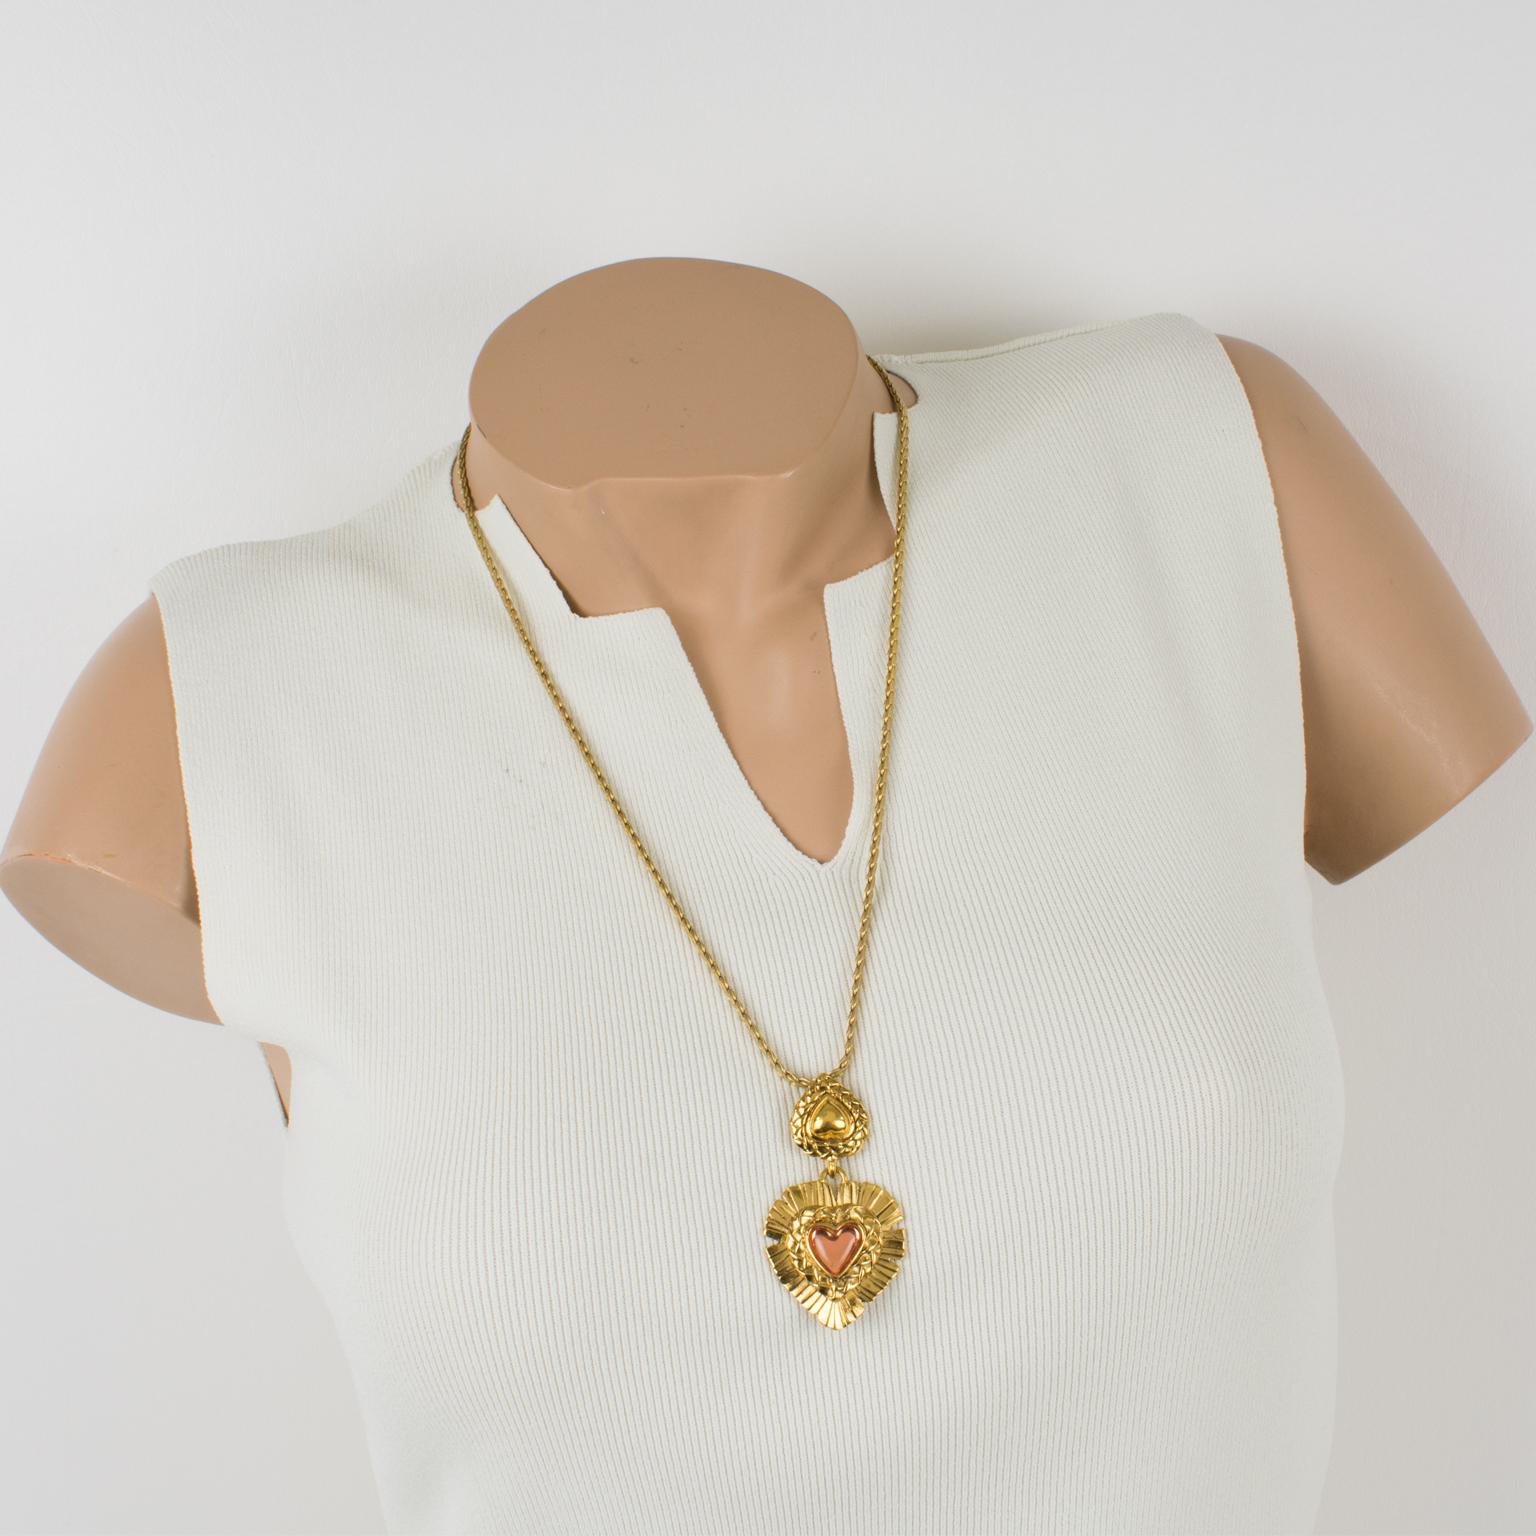 Fabulous Yves Saint Laurent Paris pendant necklace. Featuring a long gilt metal link chain and heart-shaped pendant. The pendant is in gilt metal all textured and ornate with a lovely pink resin heart cabochon. 